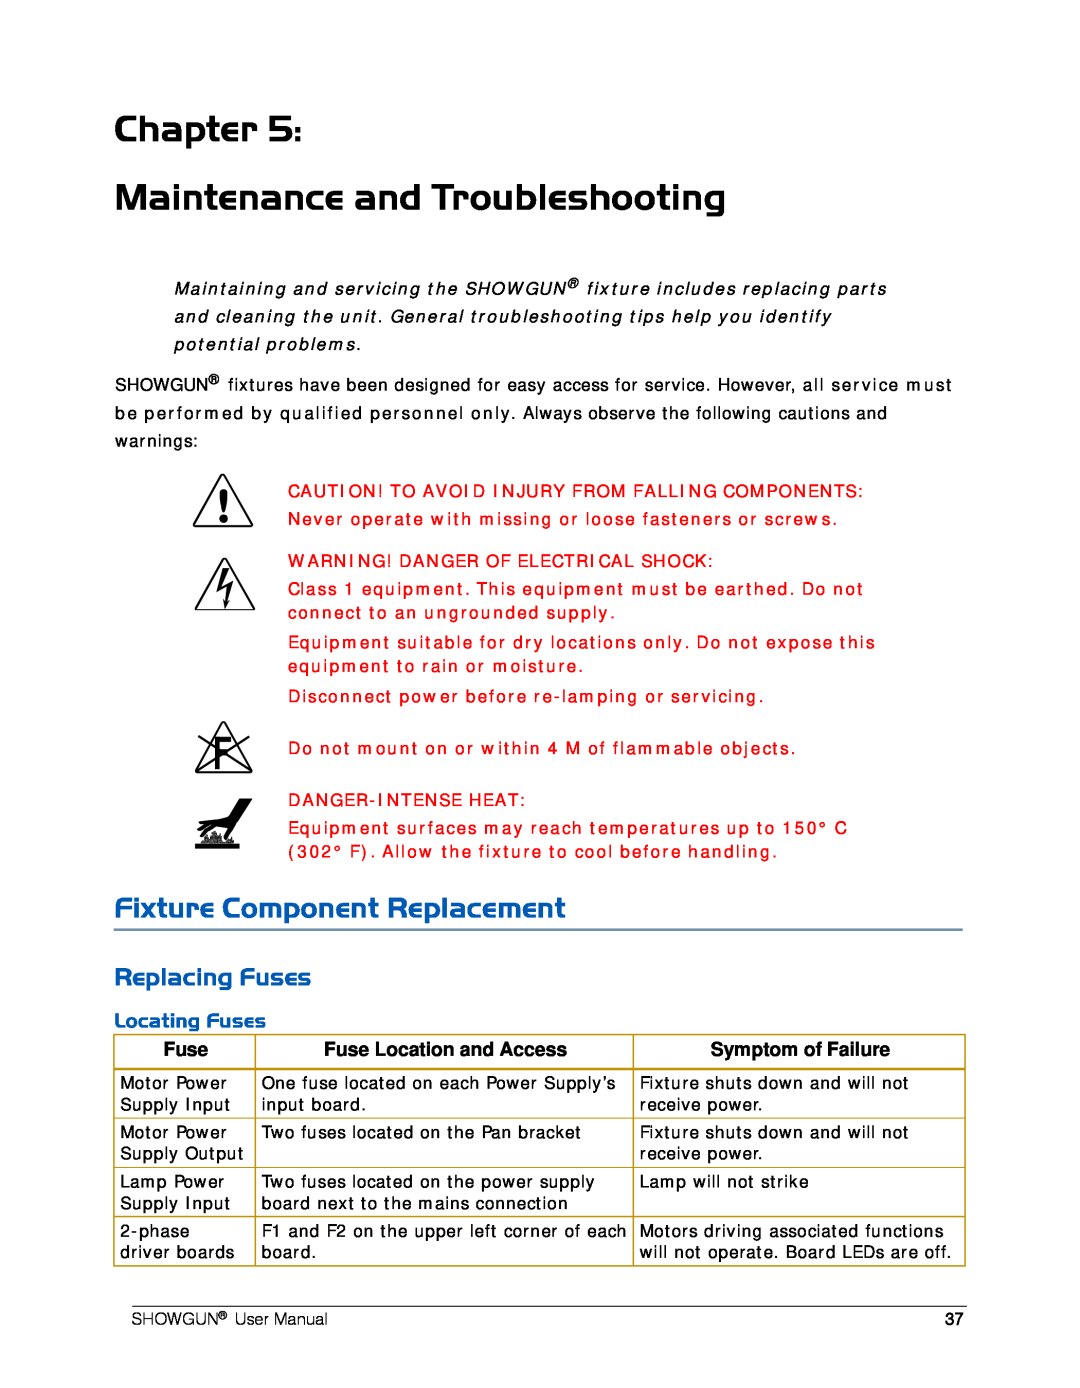 High End Systems SHOWGUN Chapter Maintenance and Troubleshooting, Fixture Component Replacement, Replacing Fuses 